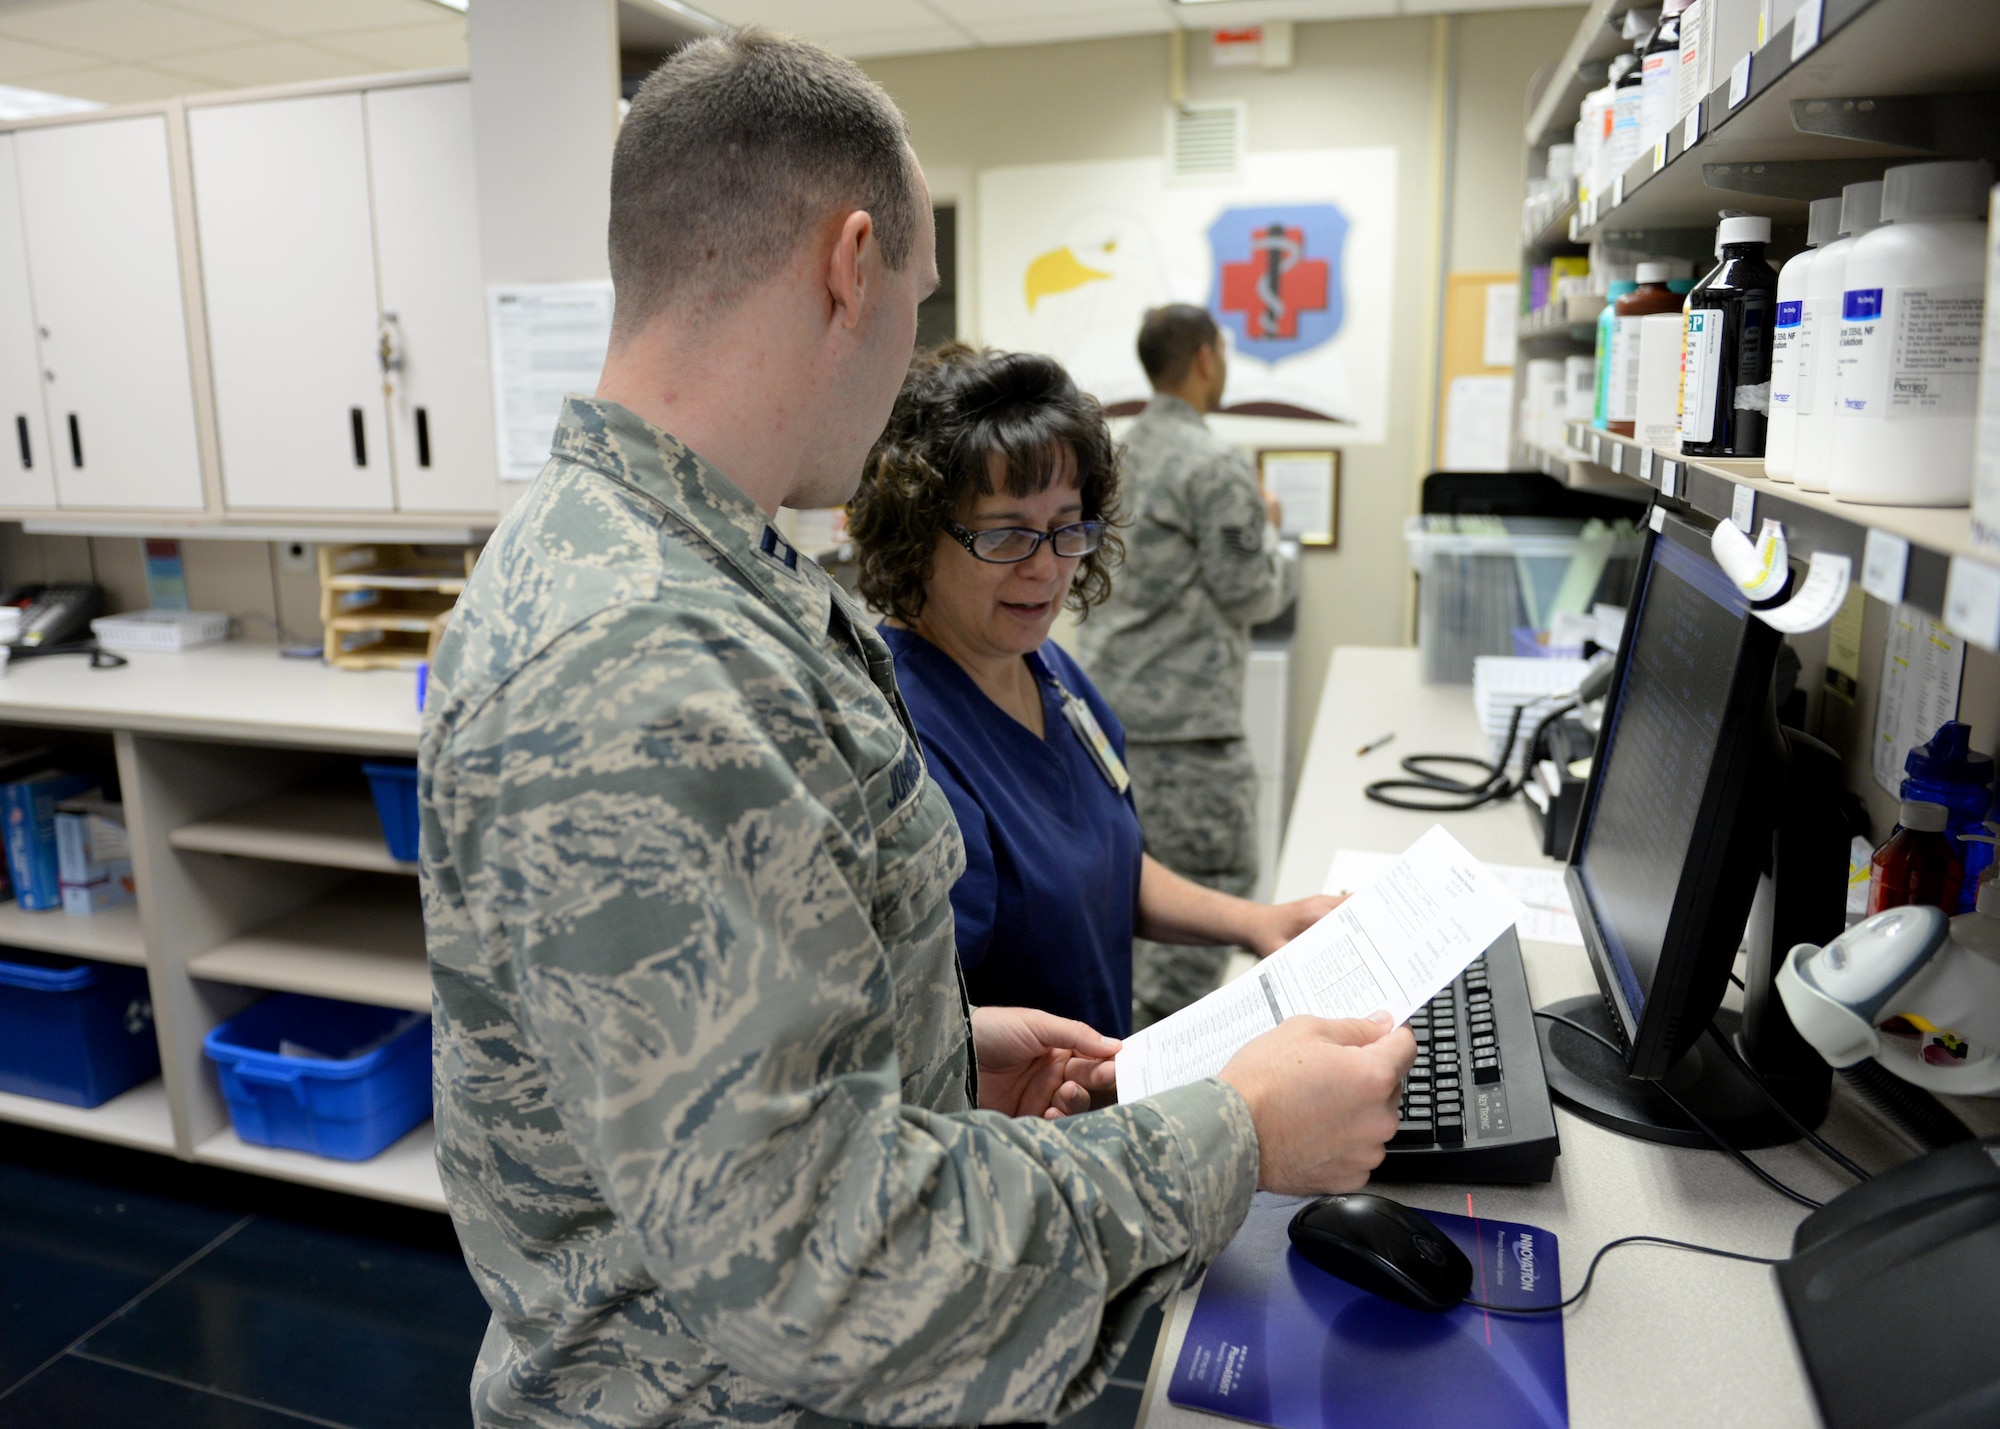 Members of the Altus Air Force Base pharmacy prepare a cold medication pack, April 10, 2017, at Altus Air Force Base, Oklahoma. The base pharmacy offers cold medication packs to those who meet their qualifications to help cut down on patient and health care provider’s time and money. (U.S. Air Force Photo by Airman 1st Class Jackson N. Haddon/Released).